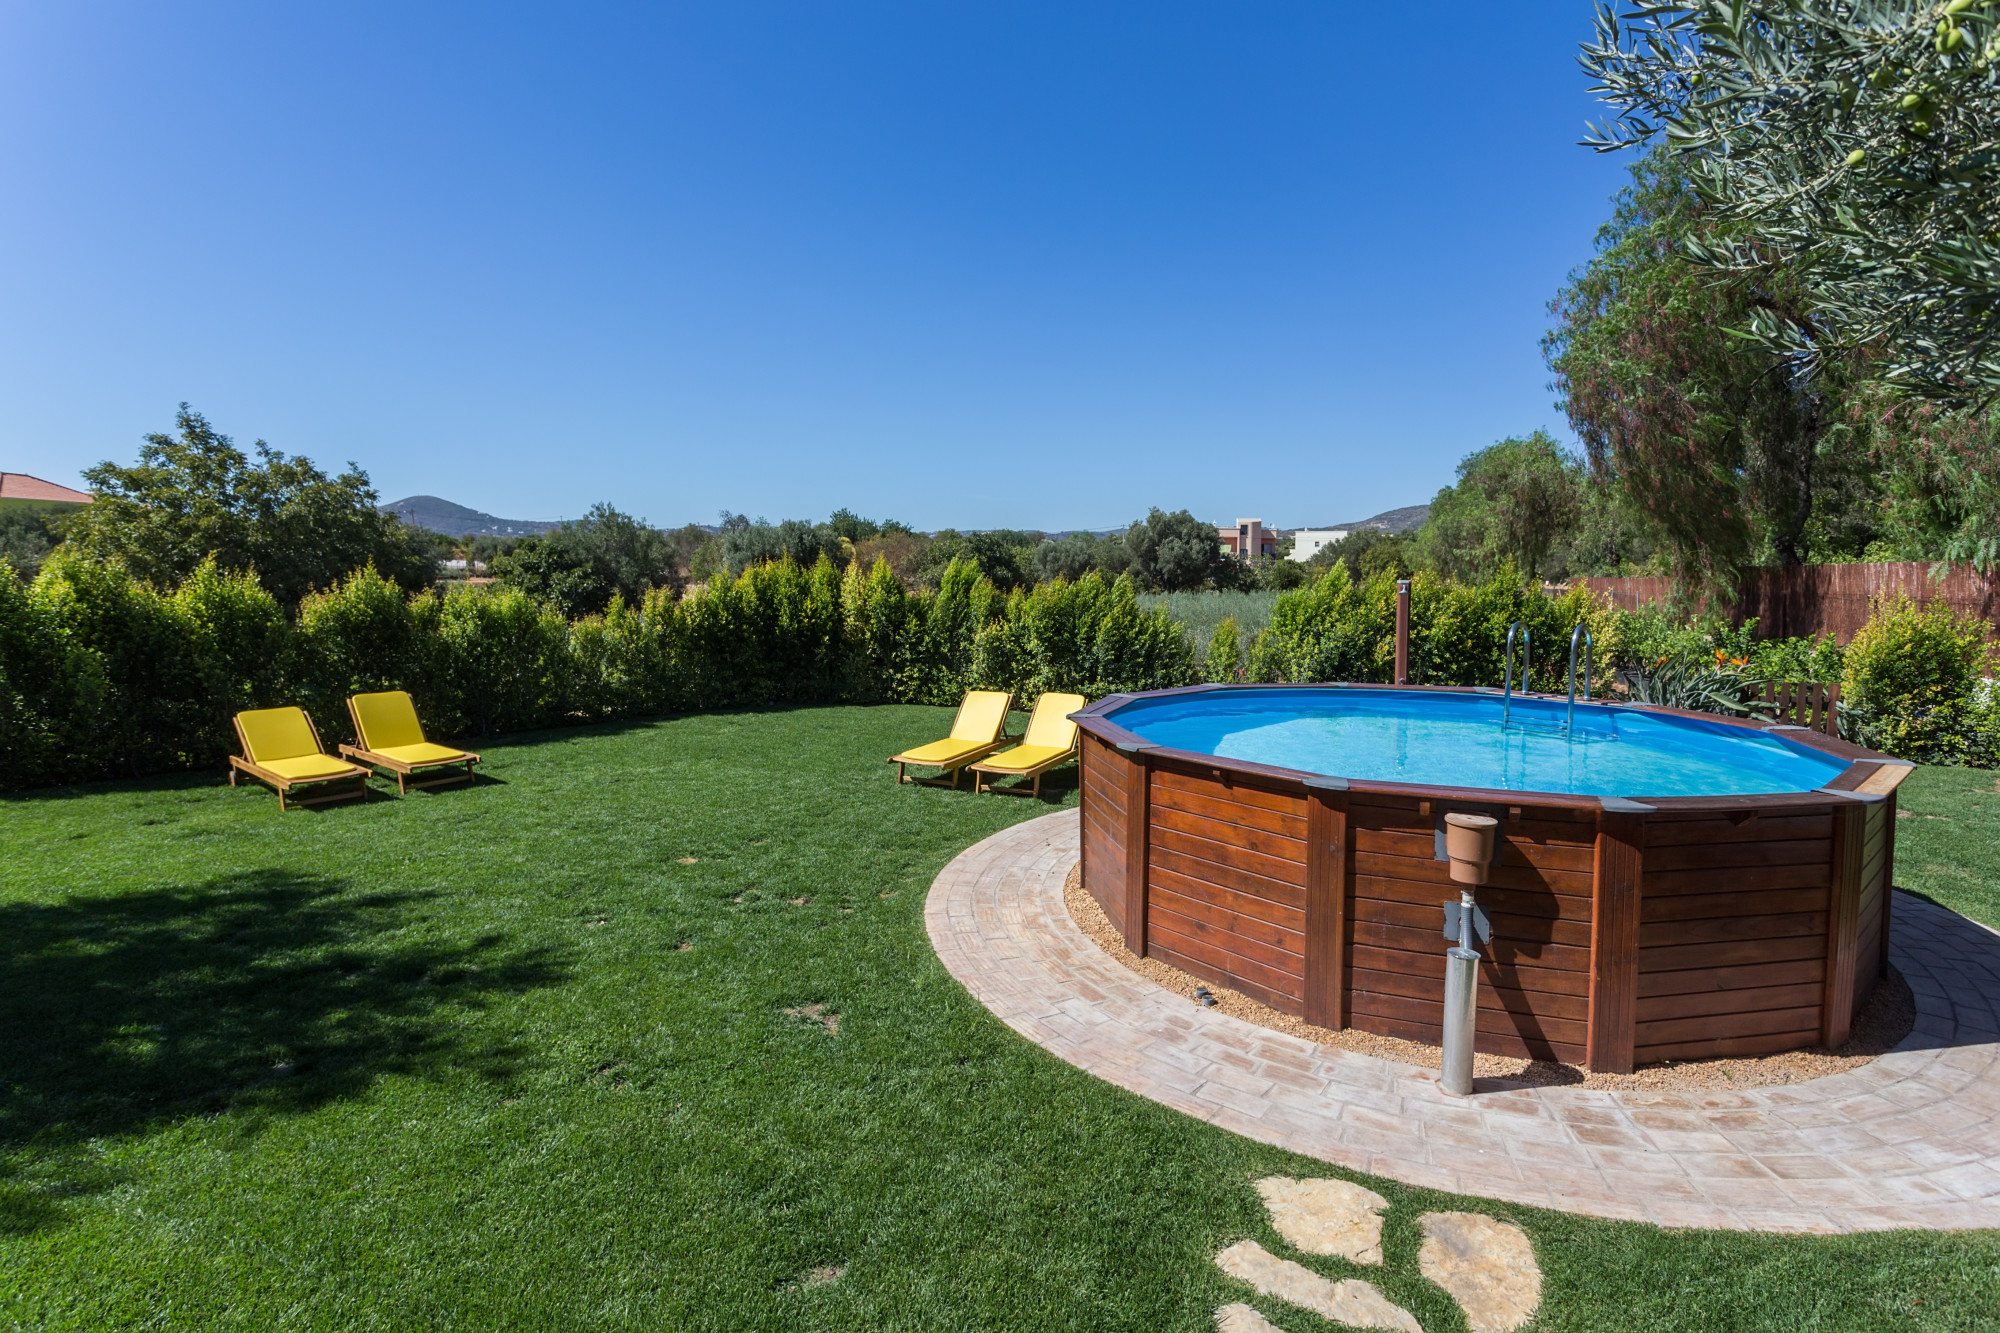 Are you looking for the right pool to add to your yard? Read here for five benefits of above ground swimming pools that you'll love.